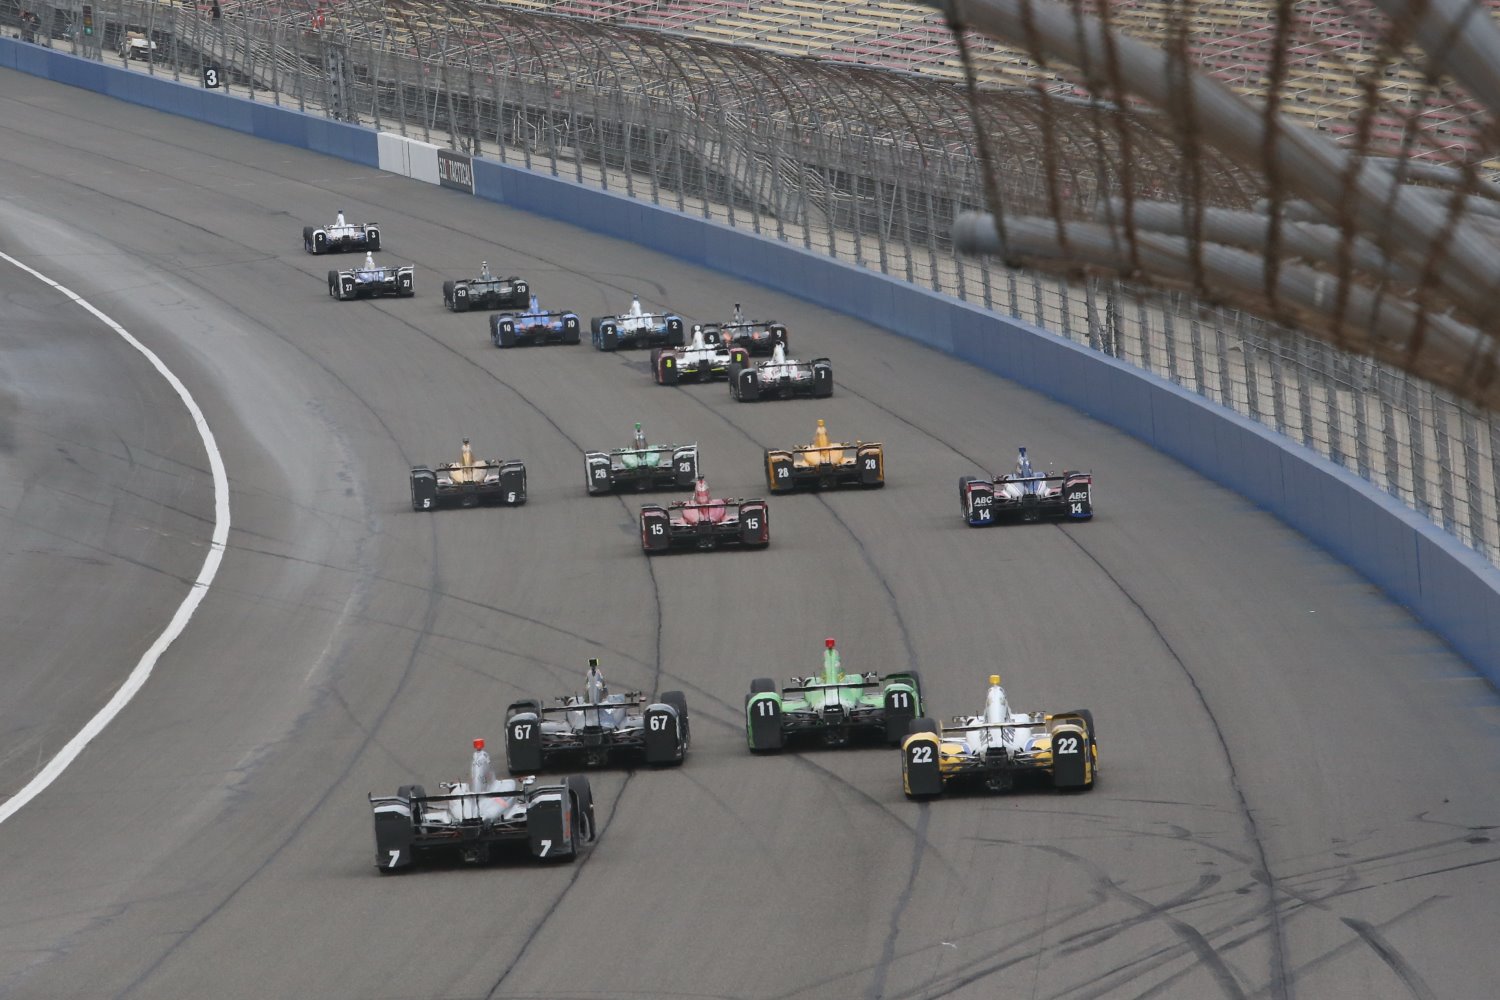 Racing is a sport and an entertainment business first and foremost. Saturday IndyCar had both